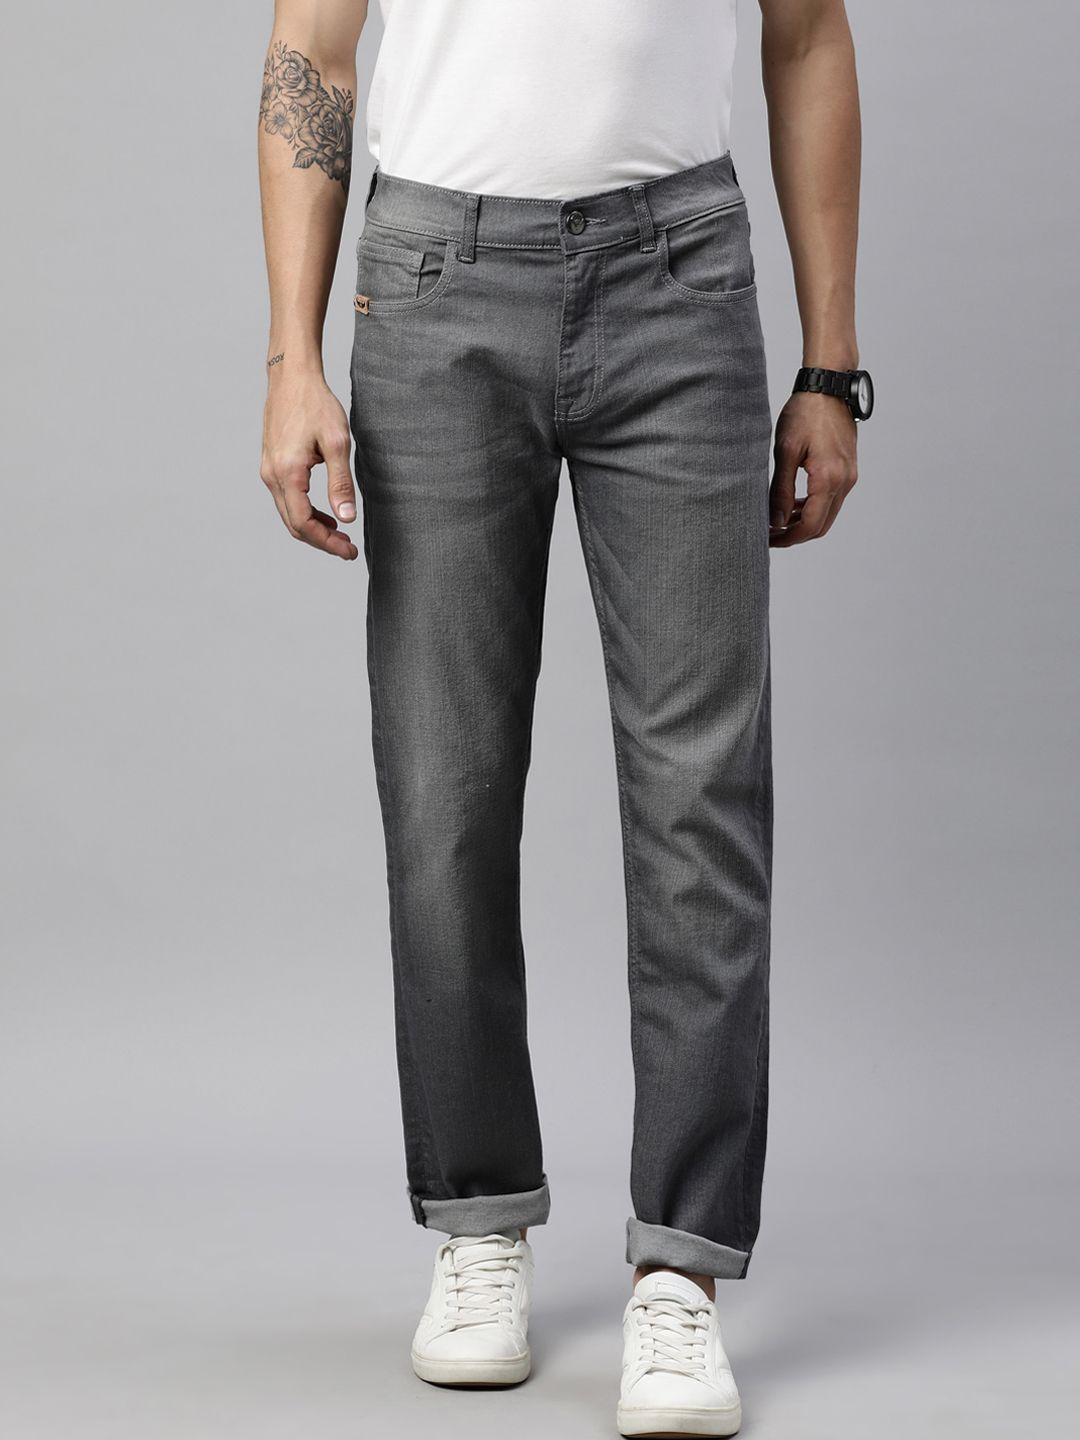 American Bull Men Grey Jean Stretchable Cotton Jeans